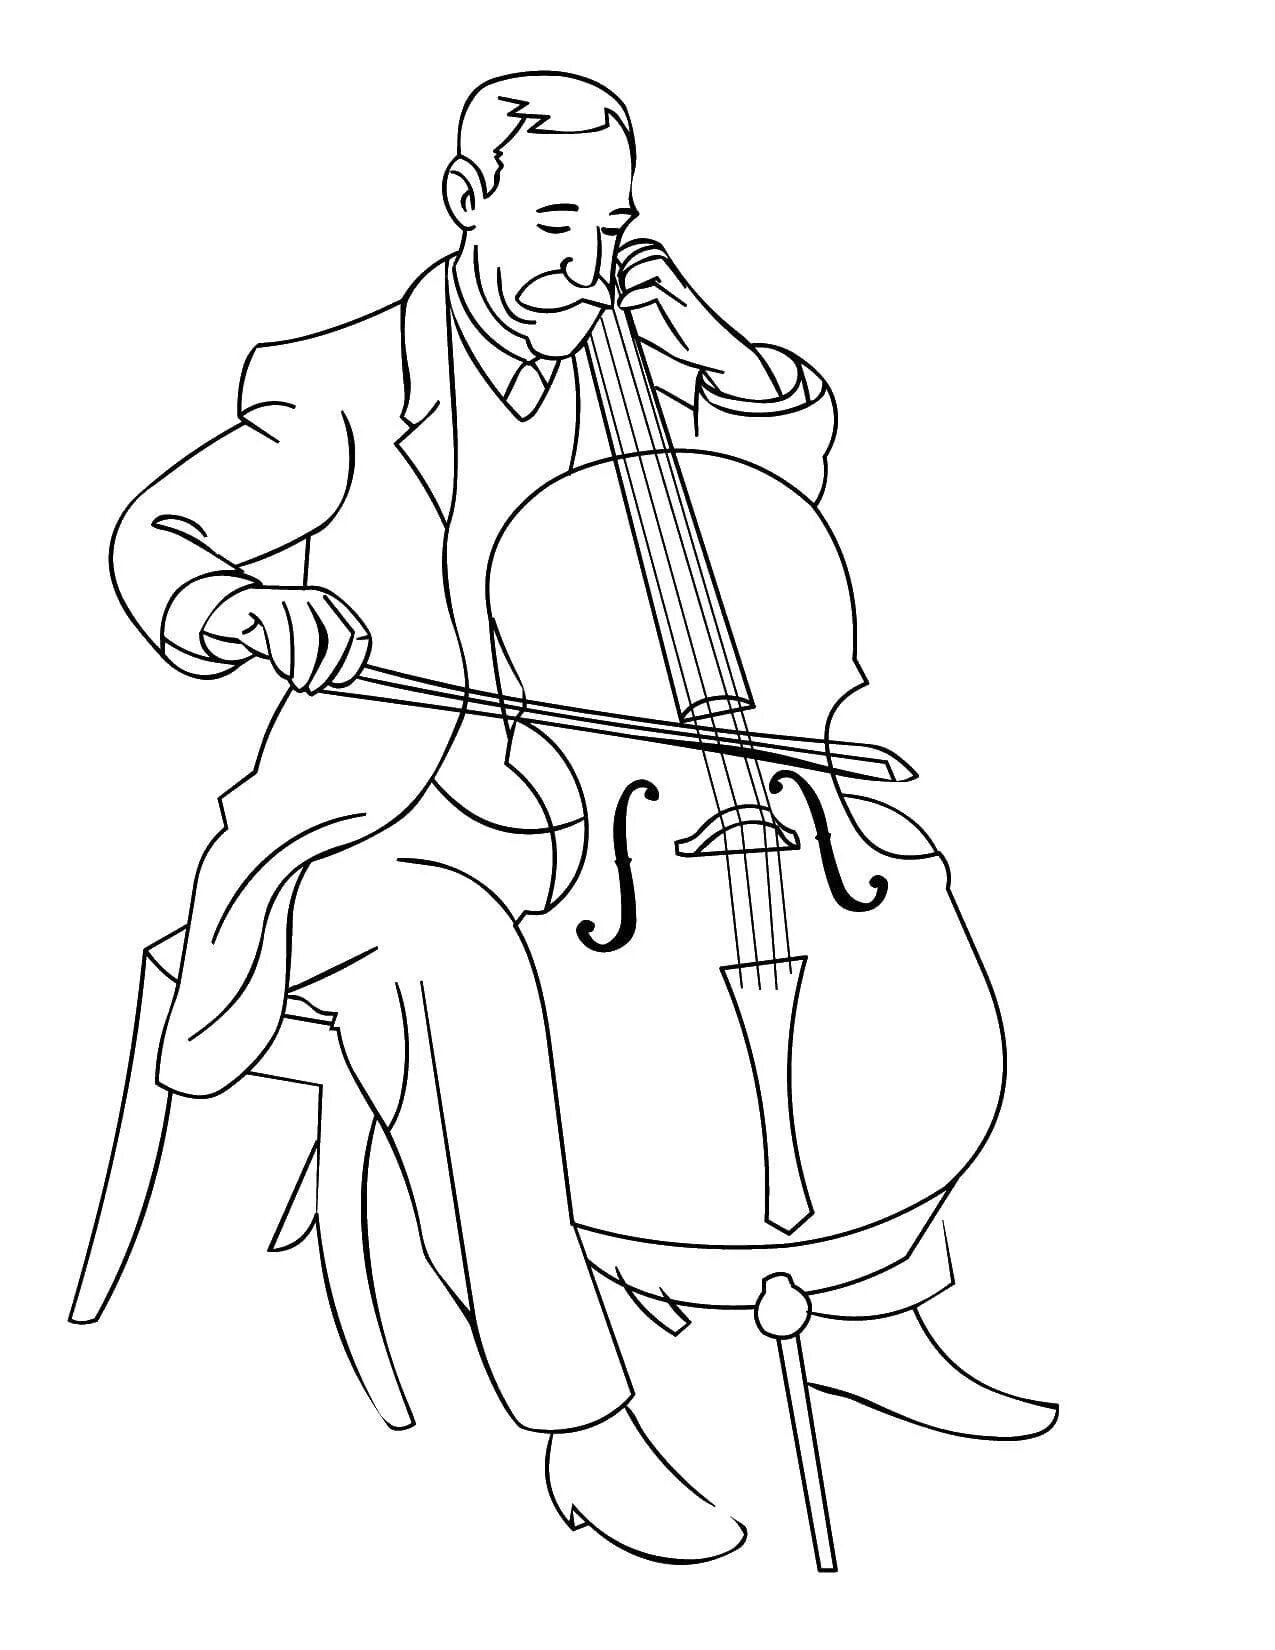 Great coloring page for junior violin